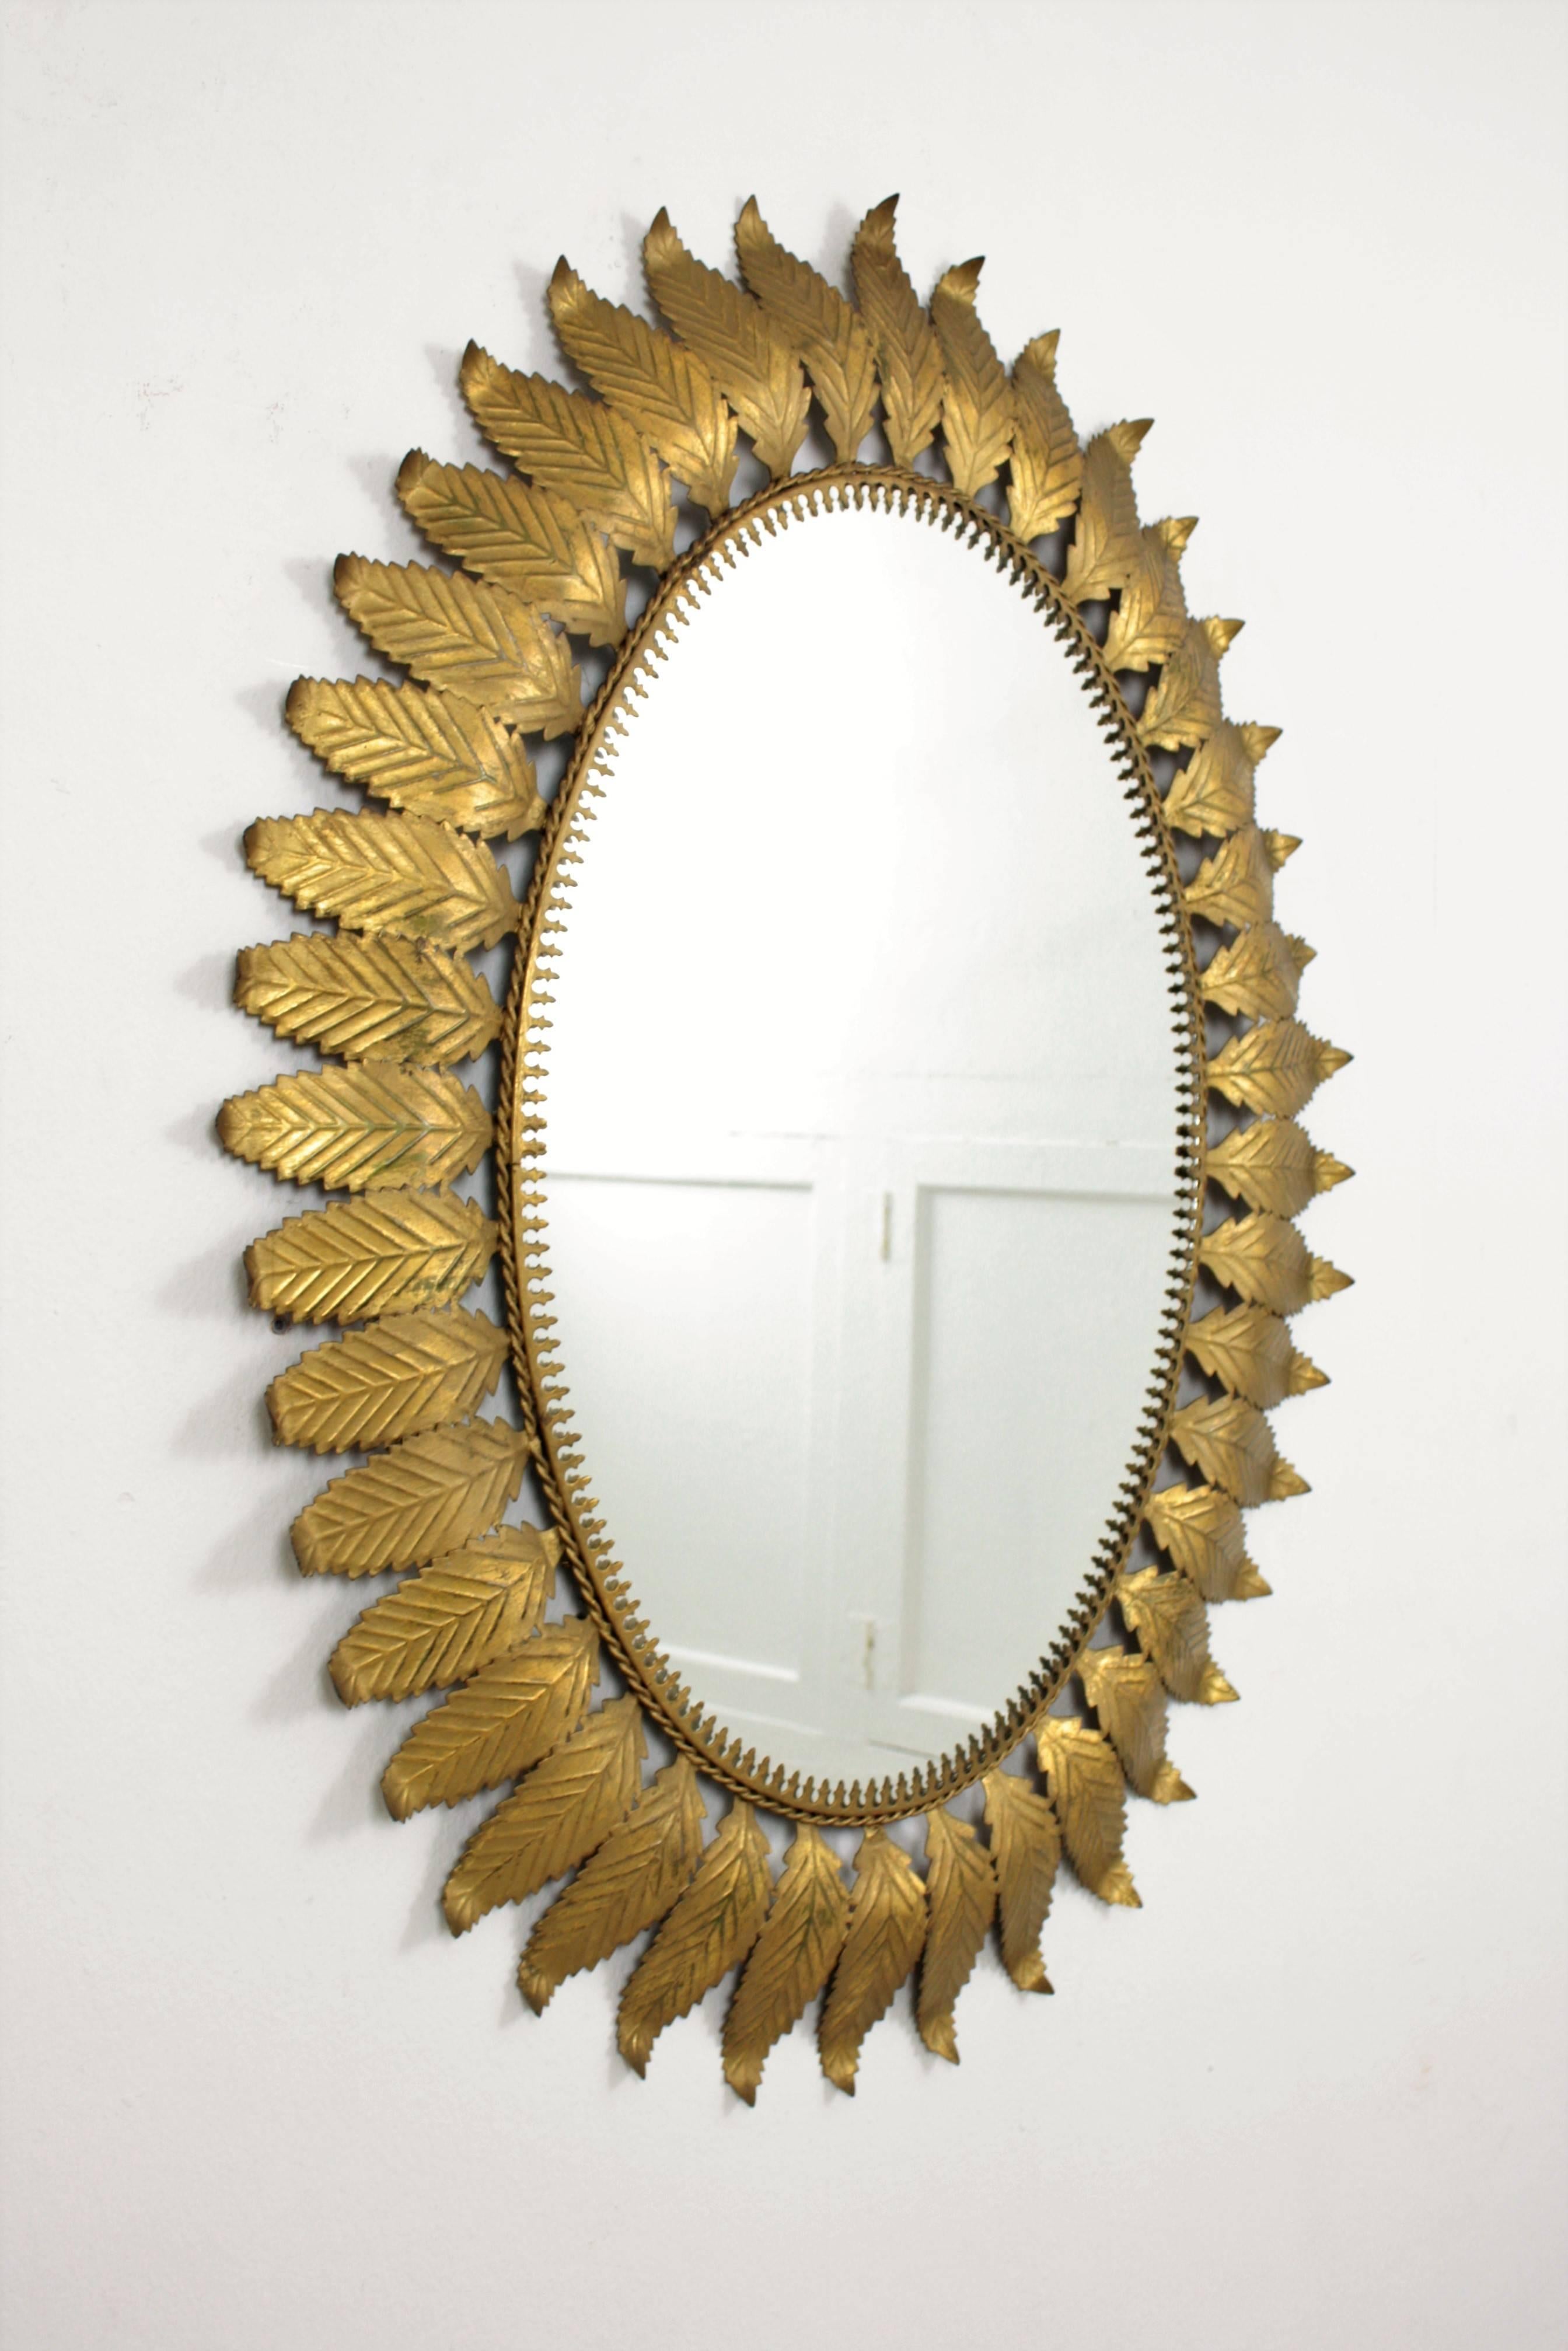 Mid-Century Modern gilt iron oval mirror framed with curved leaves. A handcrafted mirror with gilt patina manufactured in Spain at the 1960s. The large mirror surface makes this mirror a useful as well as.
Gorgeous placed alone in a powder room, in